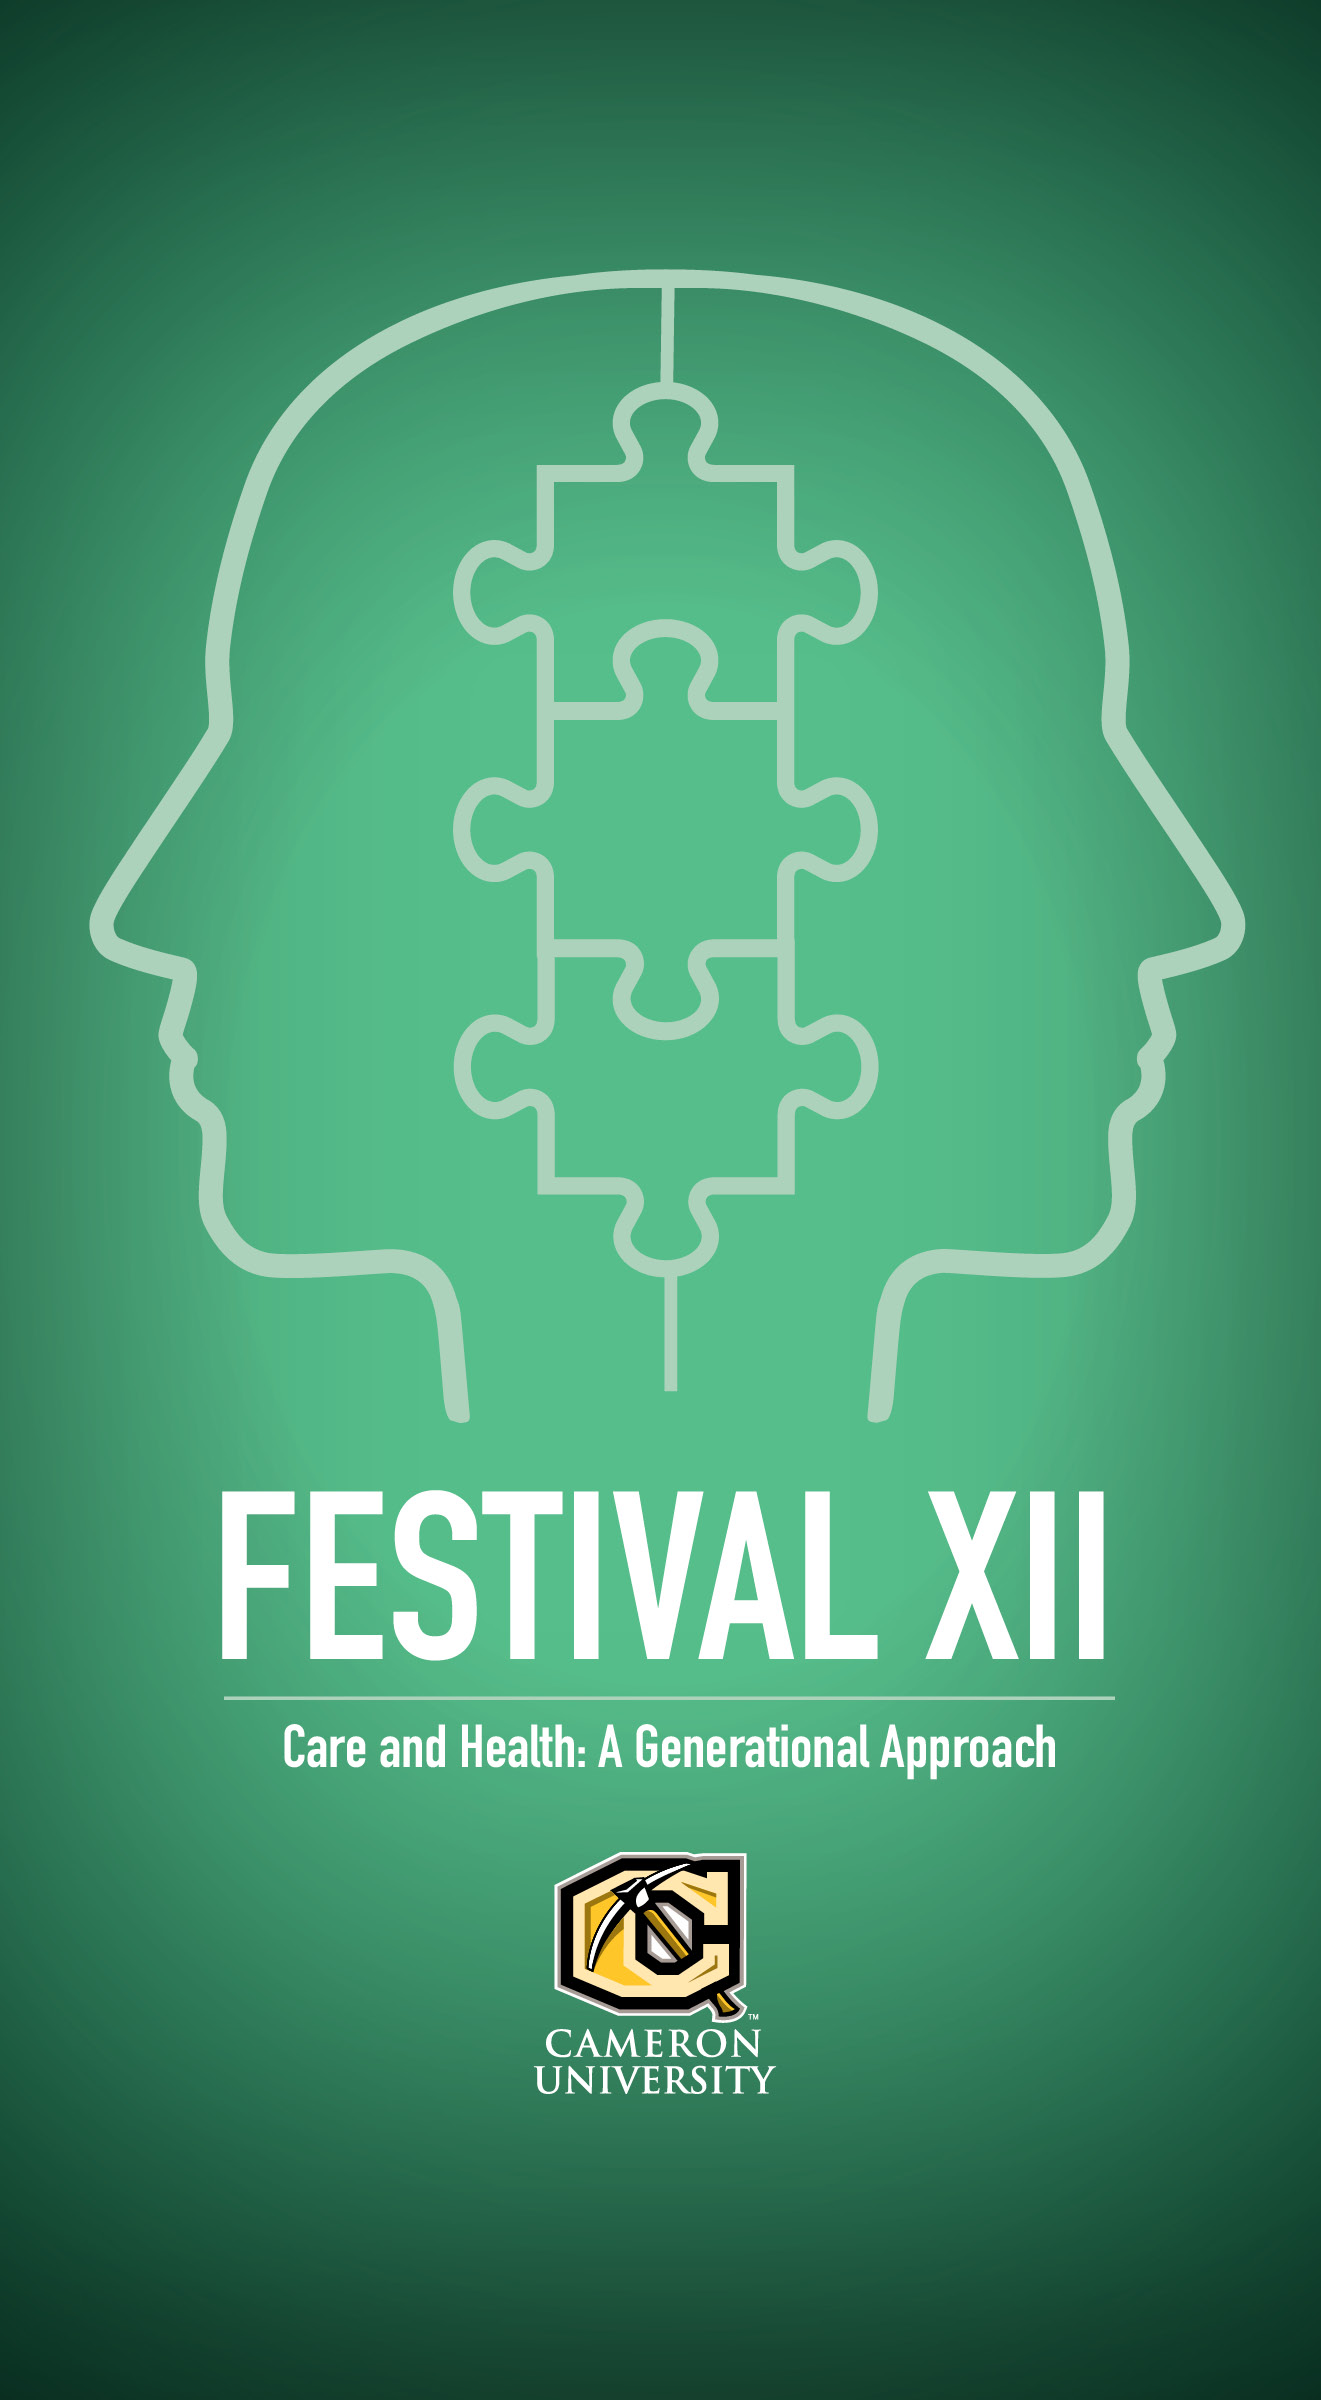 Festival XII
Care and Health: A Generational Approach